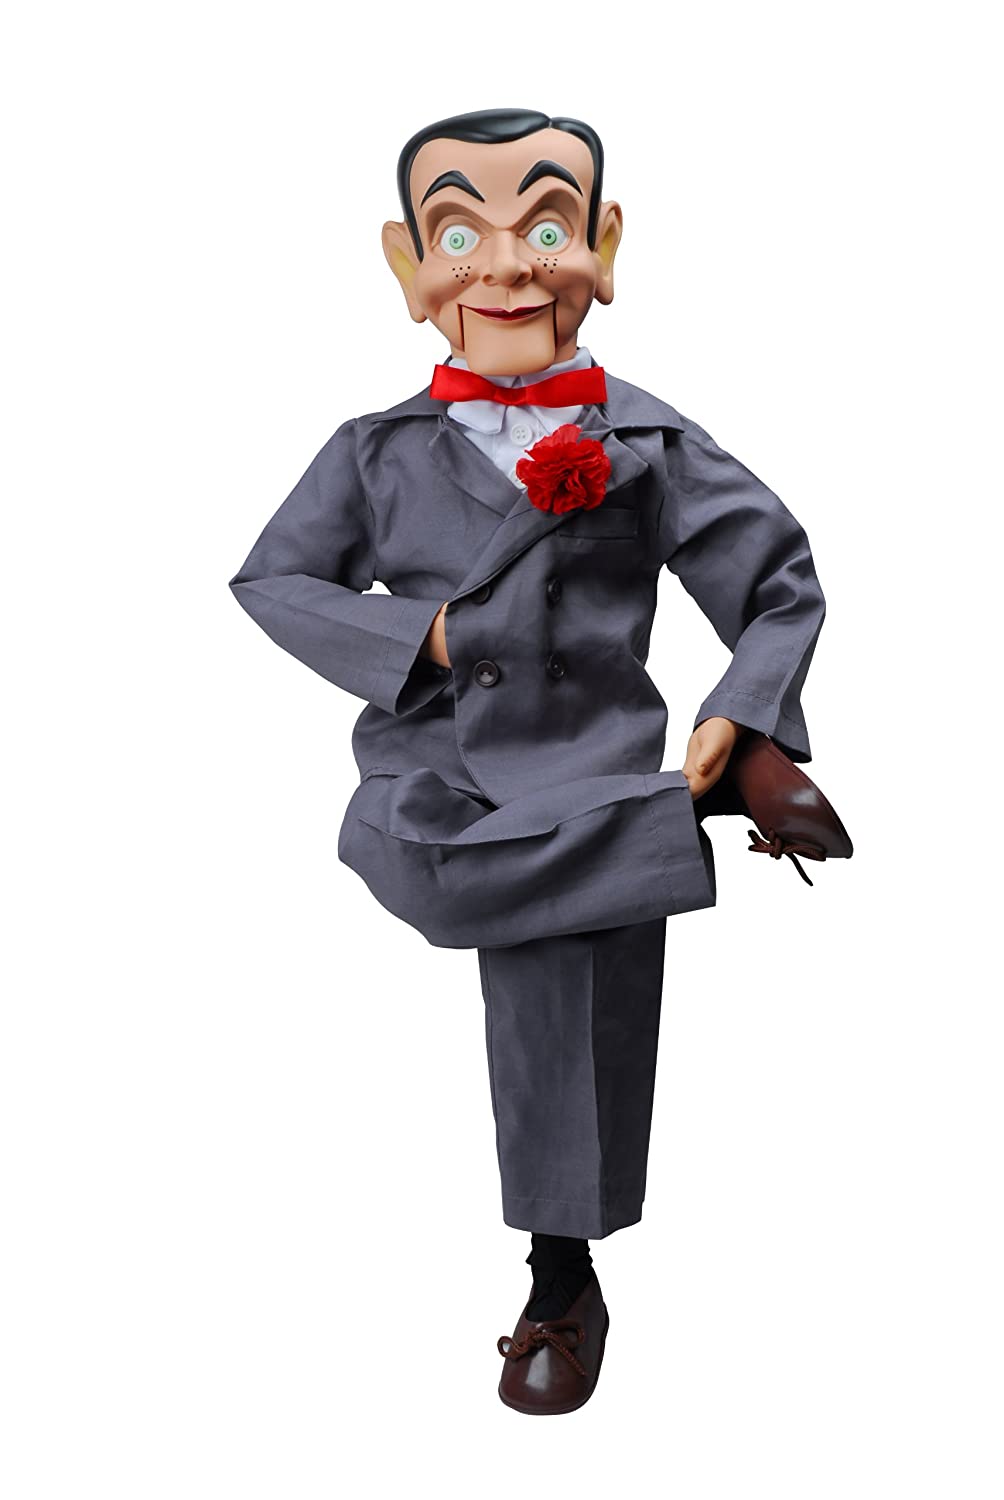 Top 9 Best Ventriloquist Dummies for Kids 2023 - Full Buyer's Guide 3